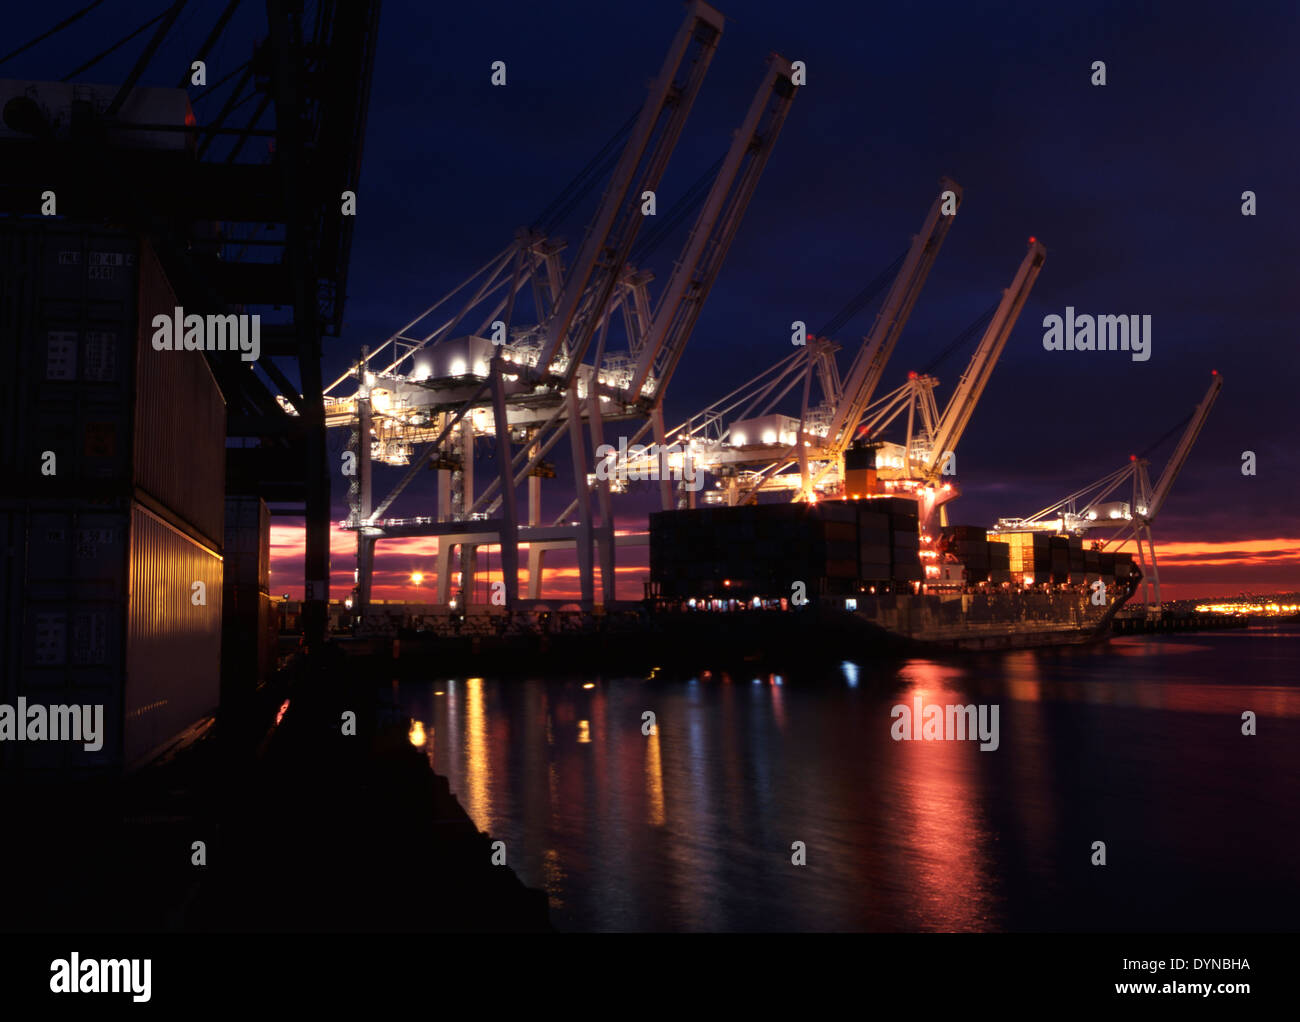 Illuminated cranes over commercial dock at night, Long Beach, California, United States Stock Photo